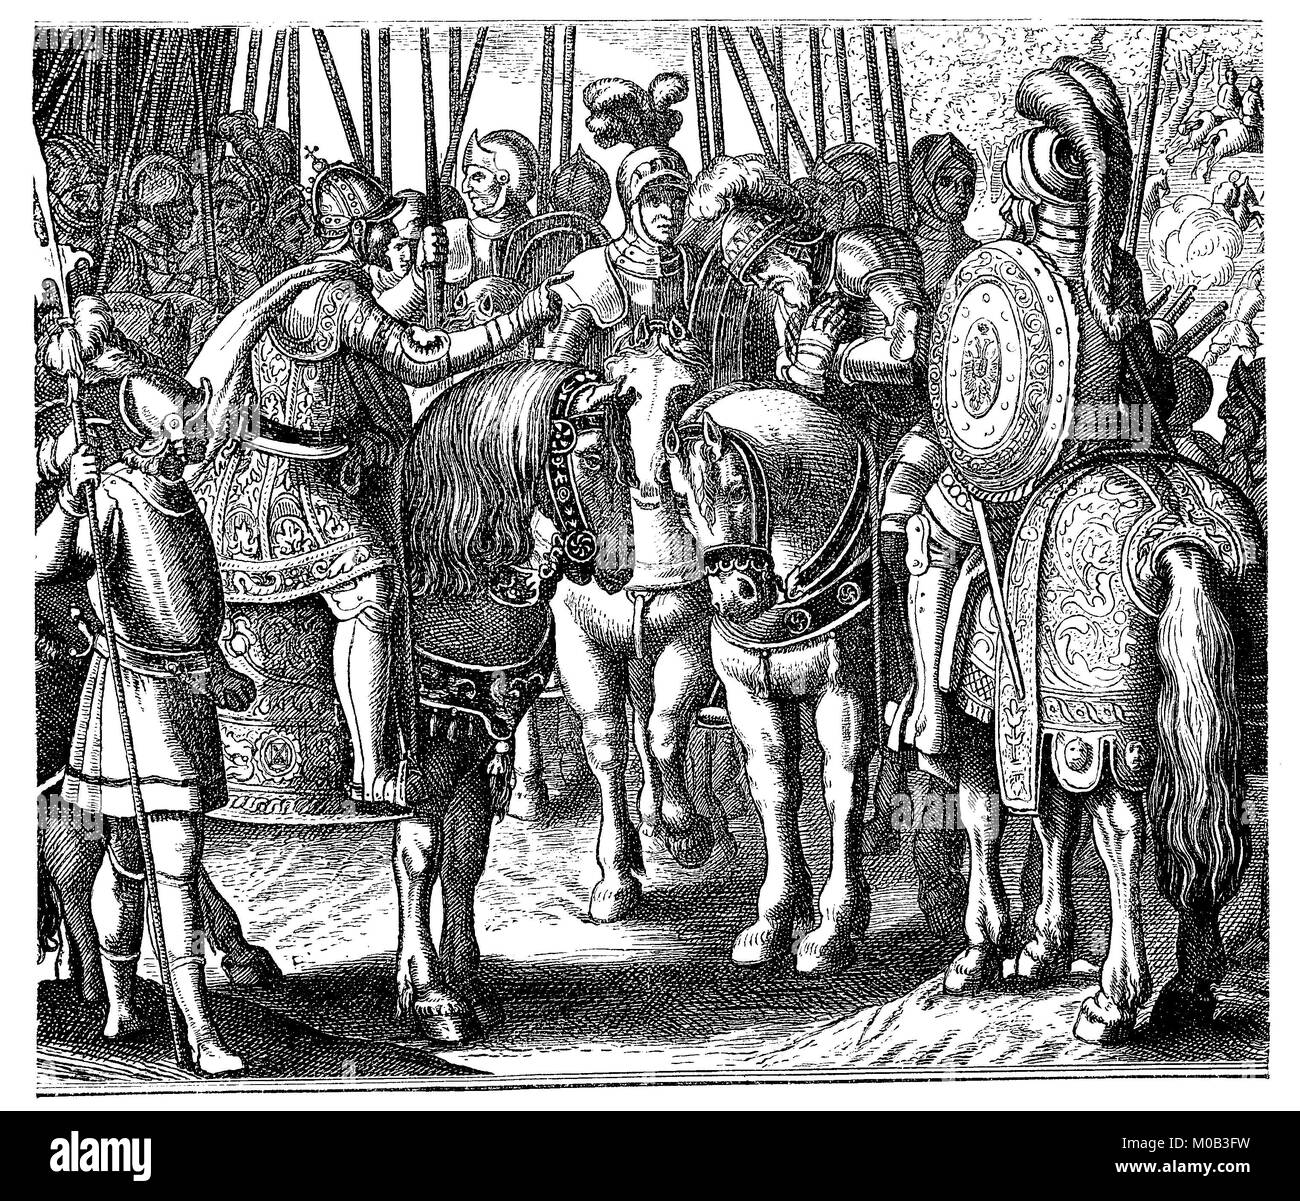 Elector John Frederick I of Saxony, also known as Frederick the Magnanimous, June 30, 1503 - March 3, 1554, meets Charles V, February 24, 1500 - September 21, 1558, digital improved reproduction of an original print from 1880 Stock Photo